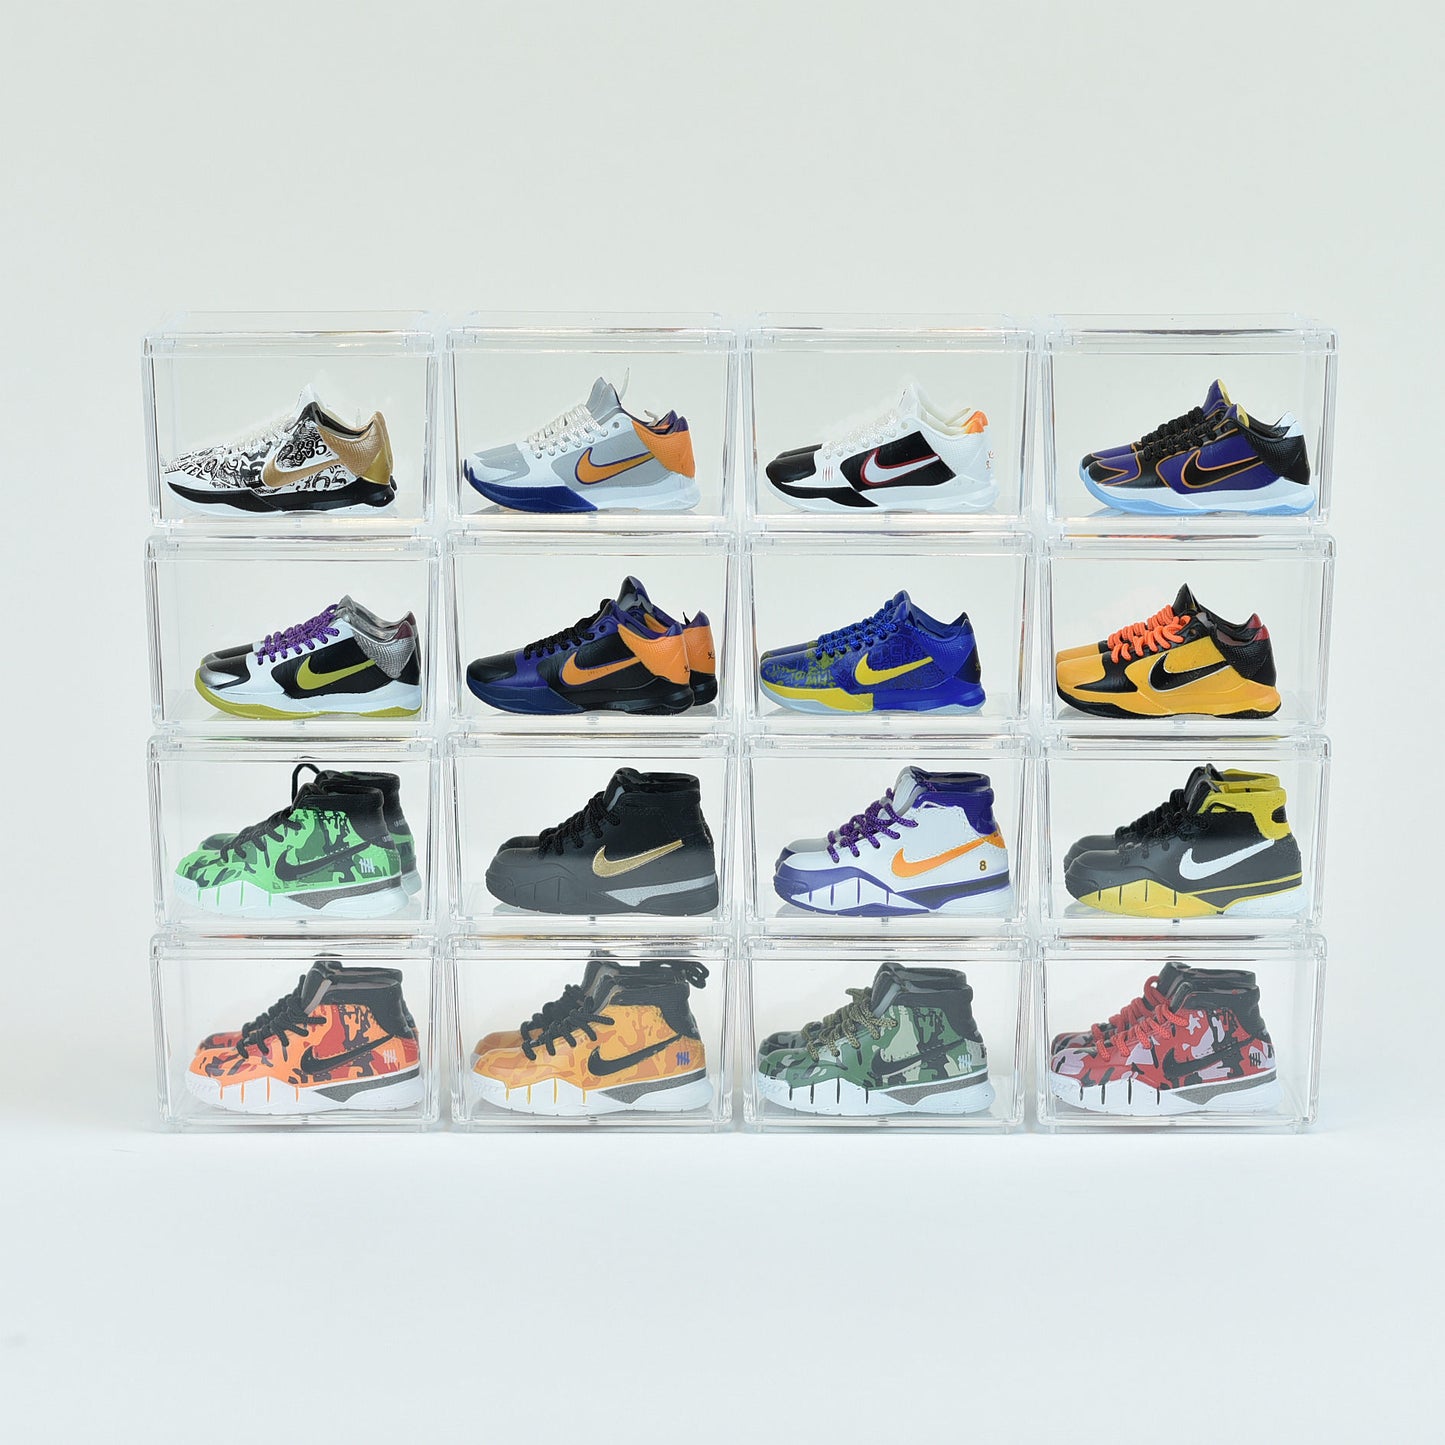 Kobe Bryant/LeBron James/Steph Curry Mini Sneaker Collection with Display Case